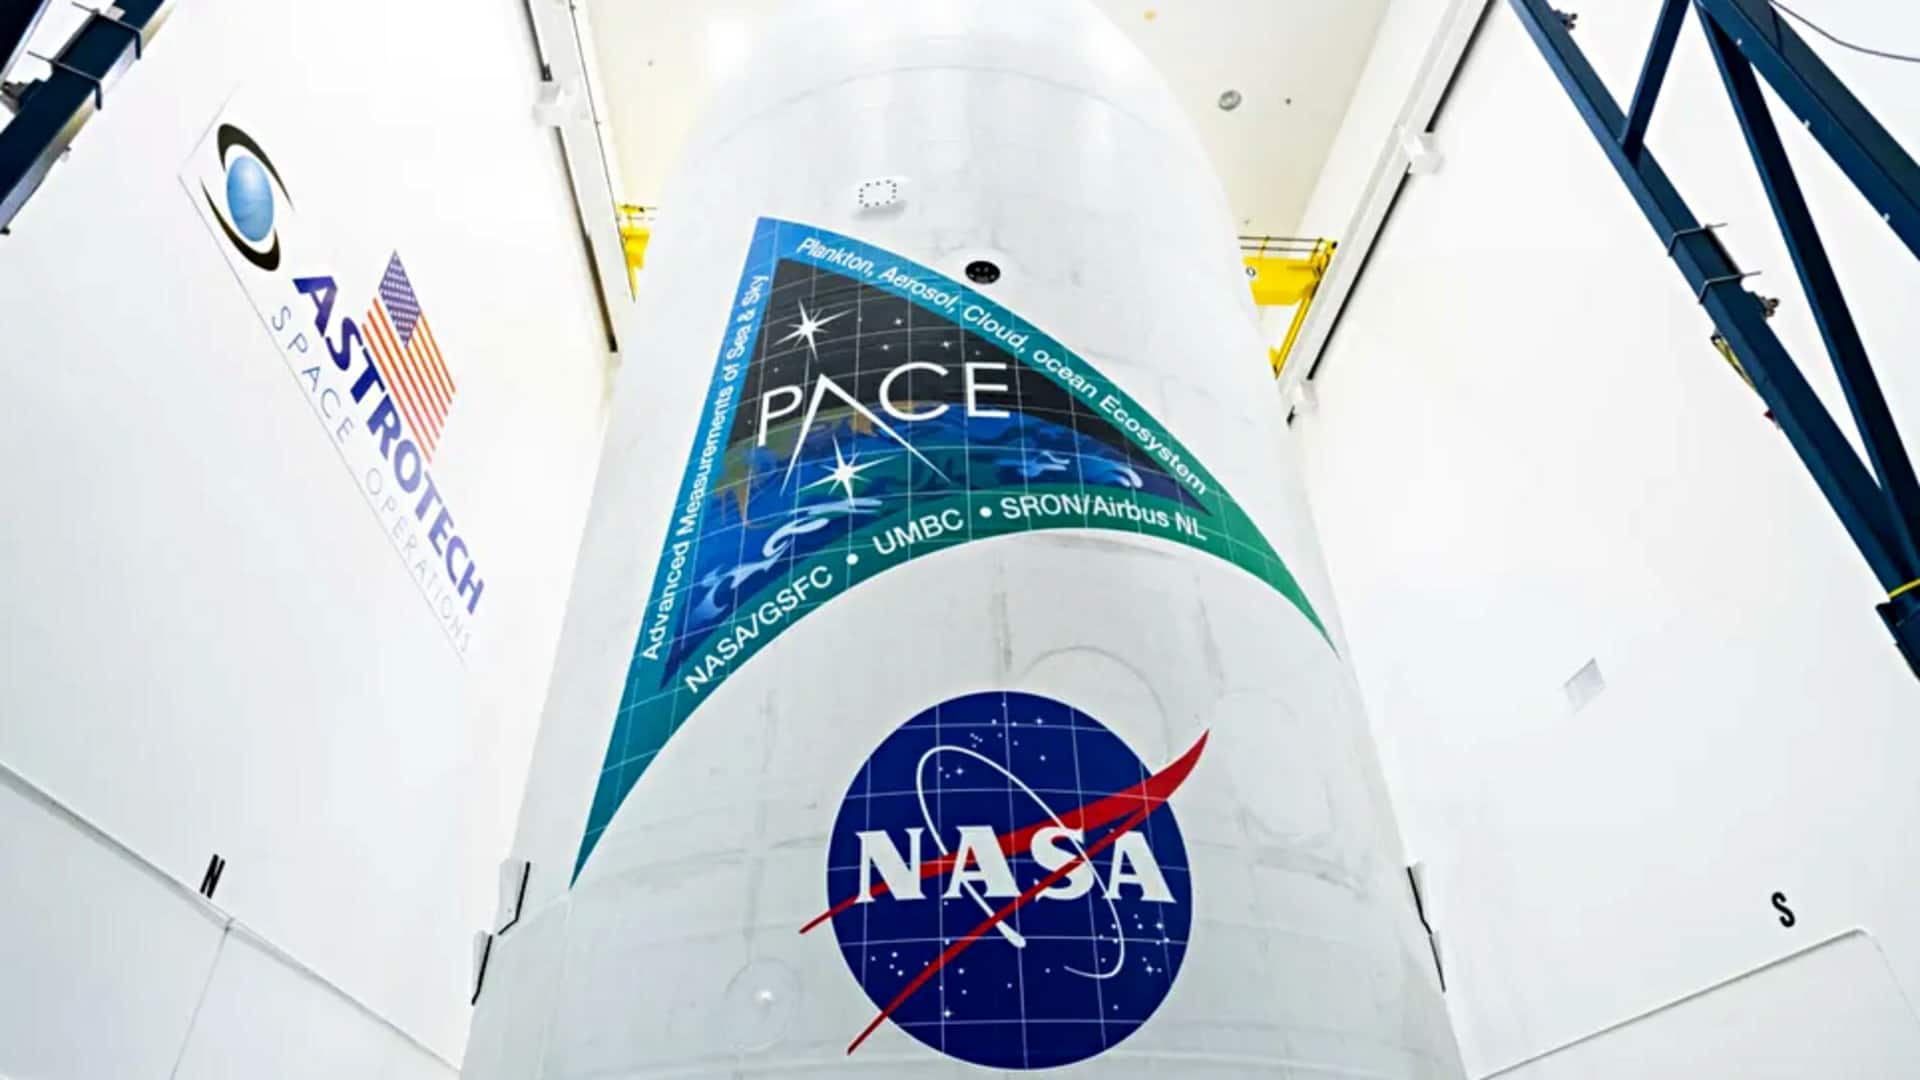 SpaceX to launch NASA's PACE ocean-monitoring satellite on February 6